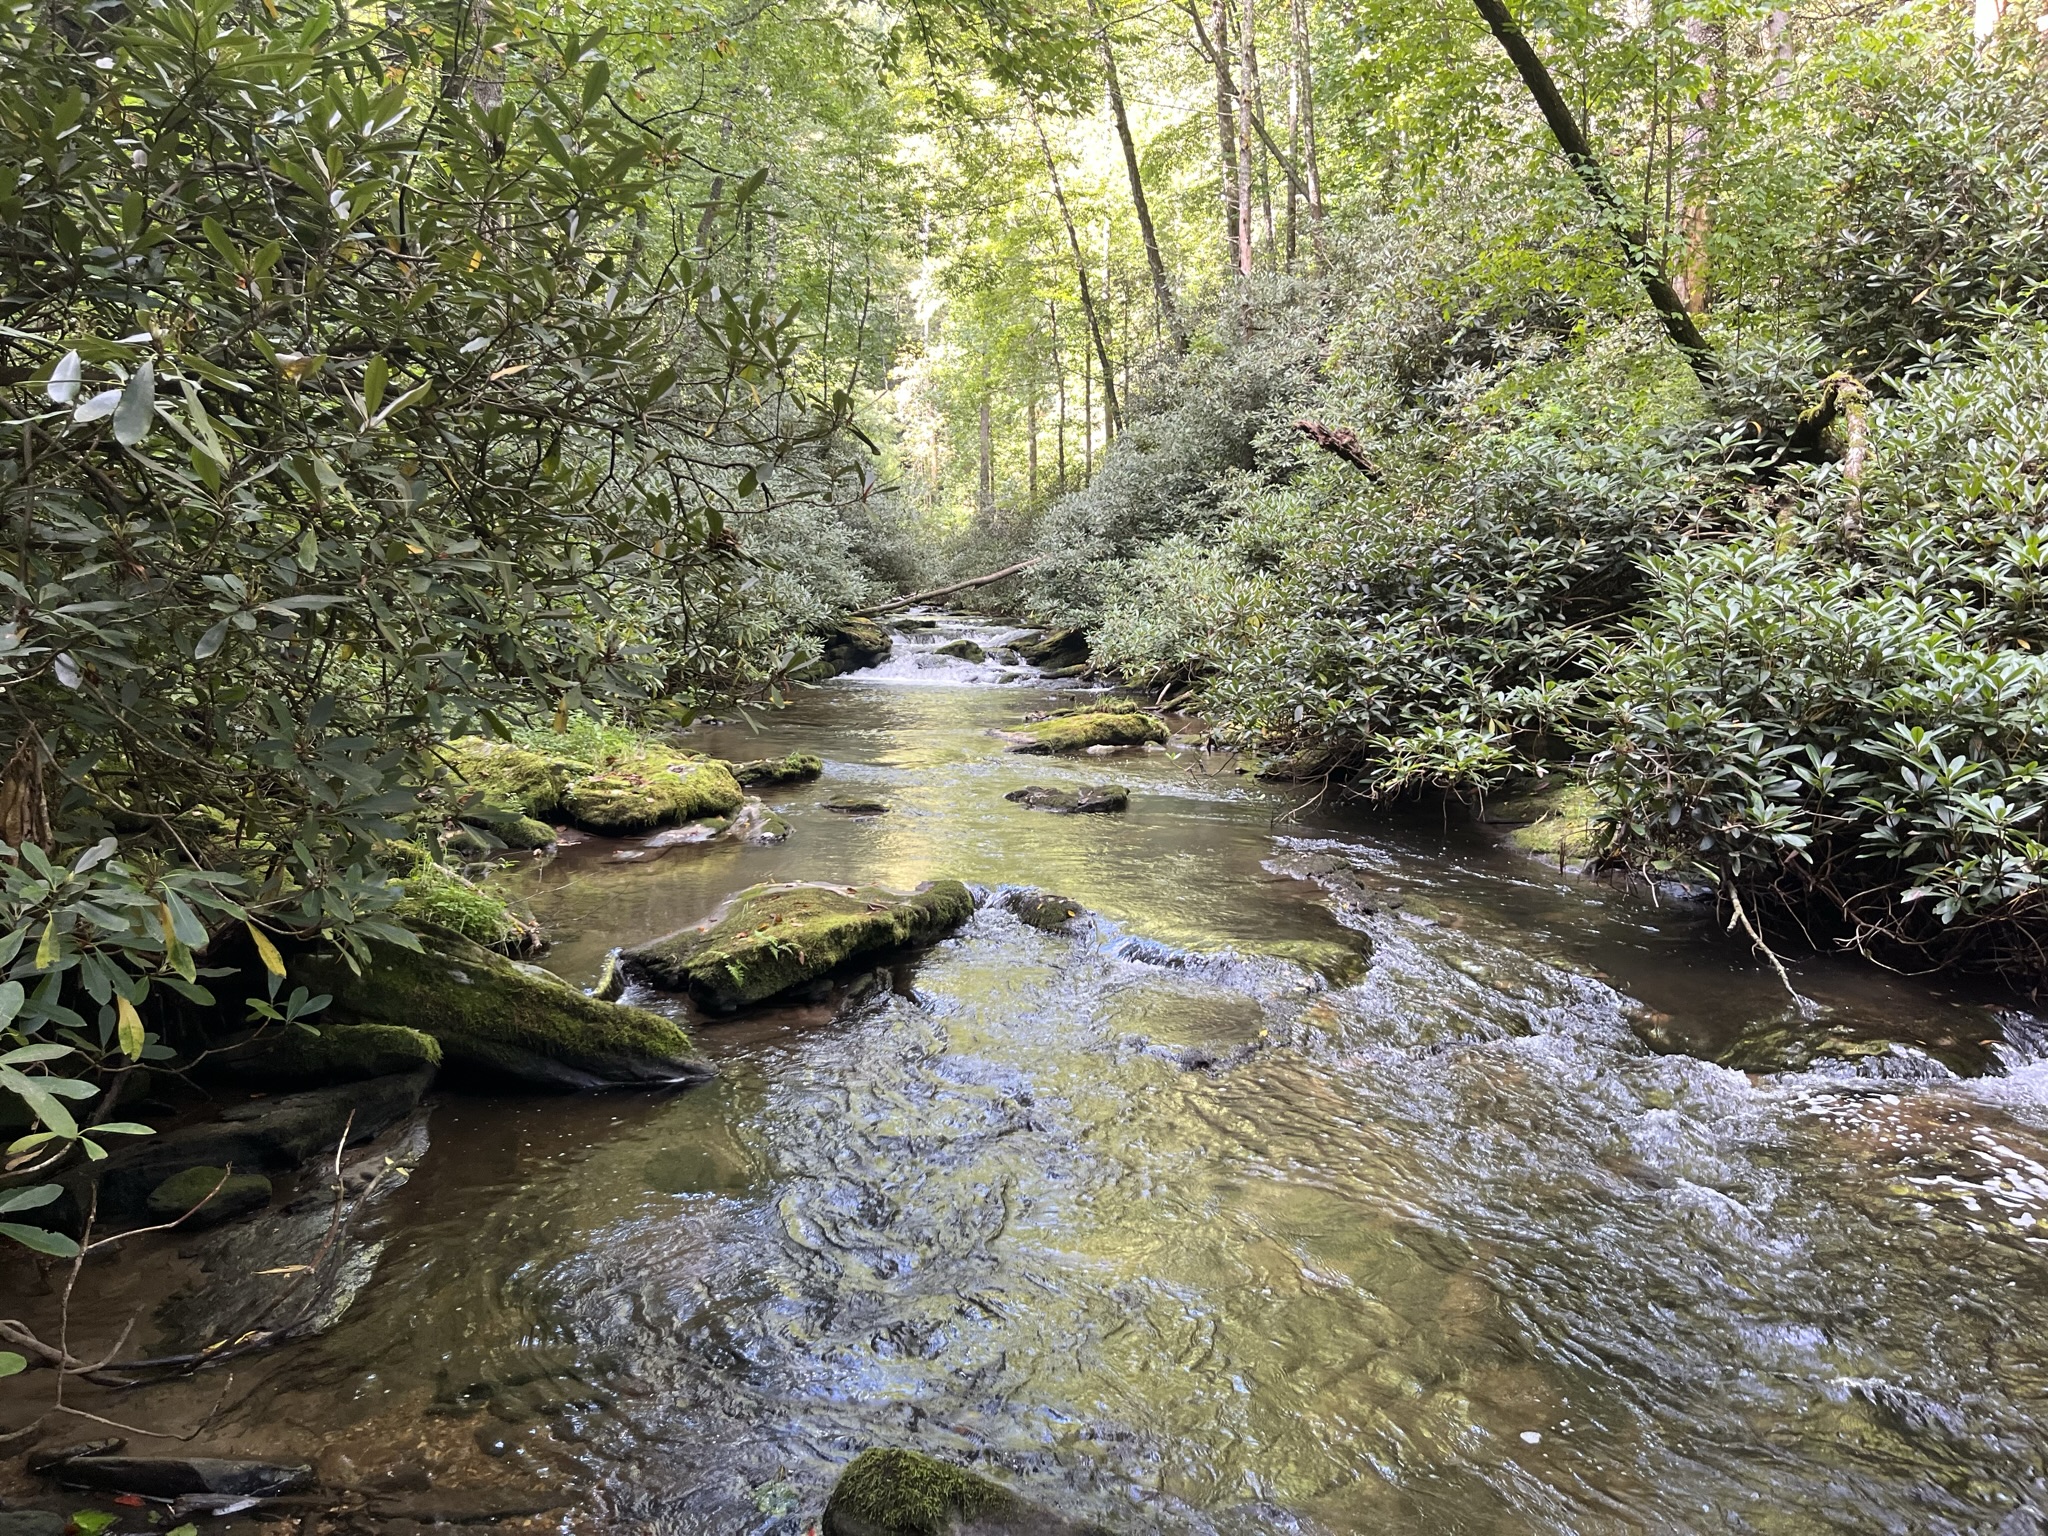 Along the east fork of the Chattooga River